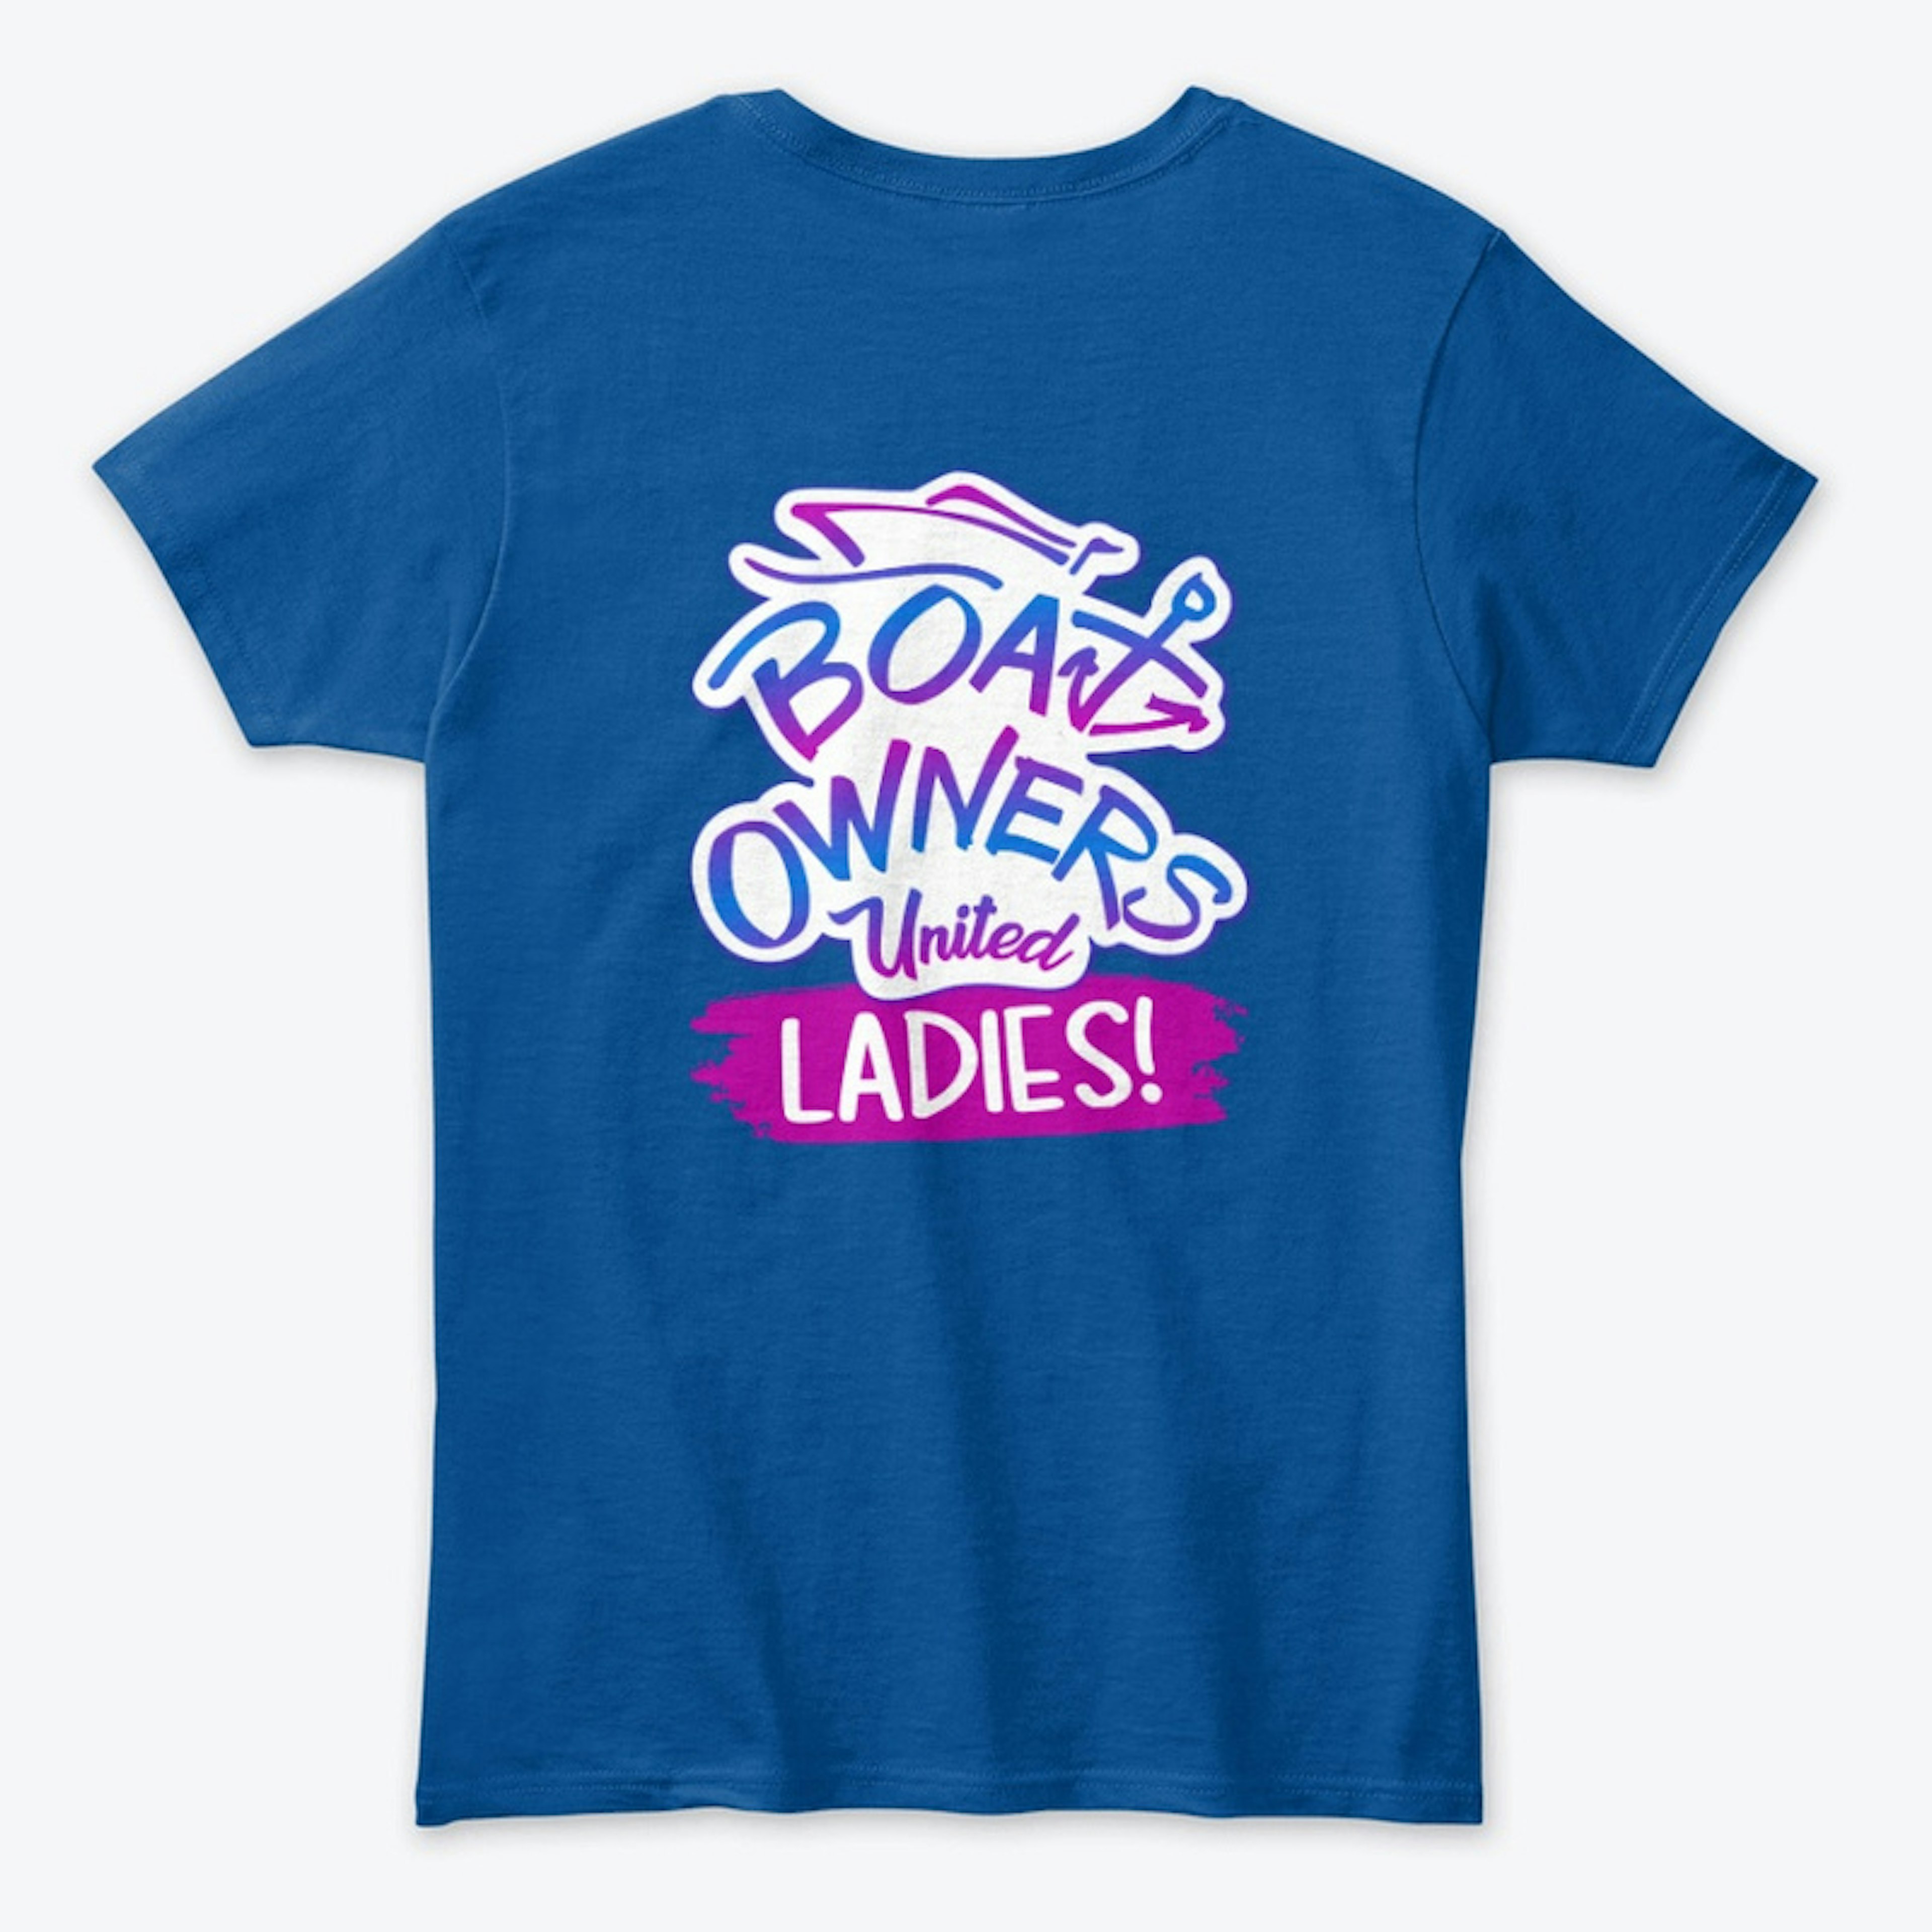 Boat Owners United Ladies Classic Tee